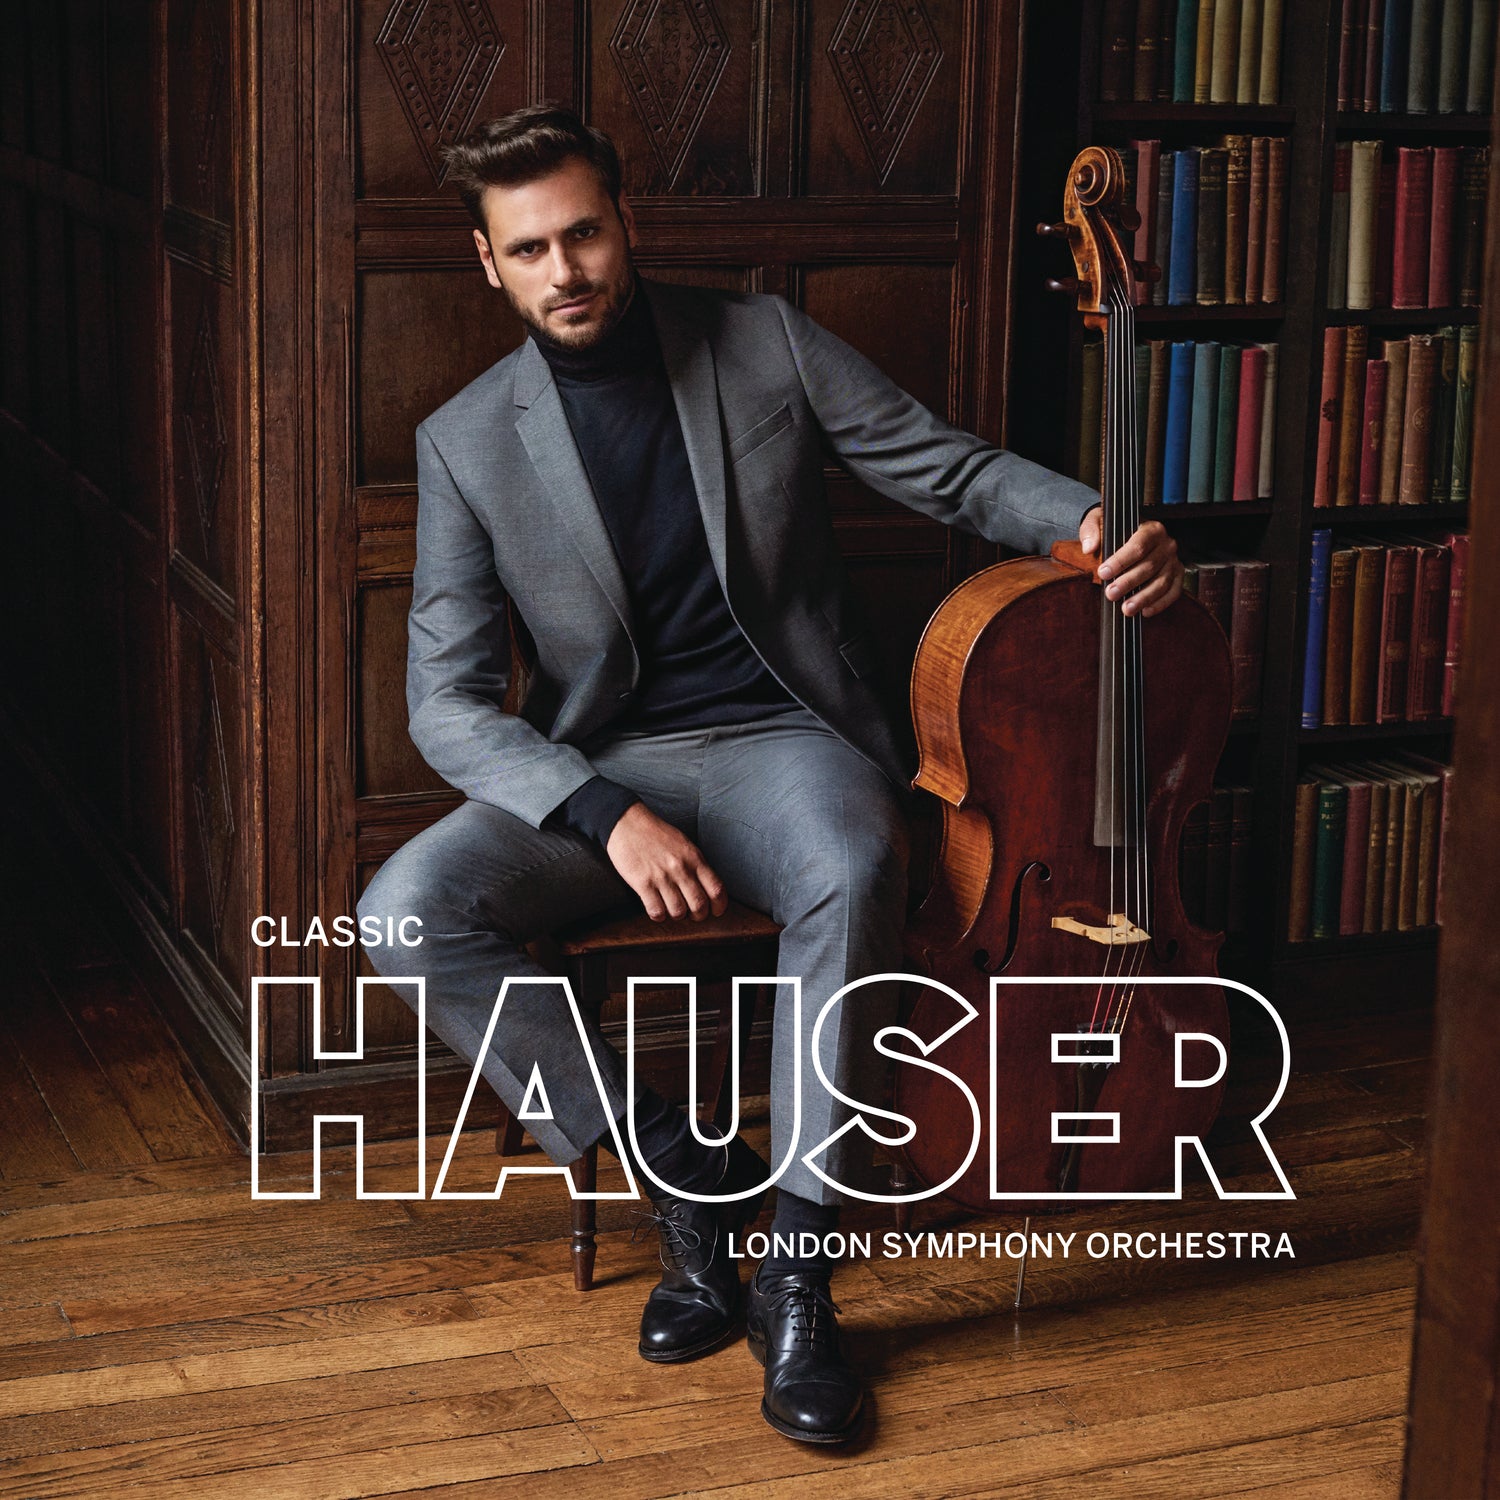 Classic / Hauser, London Symphony Orchestra